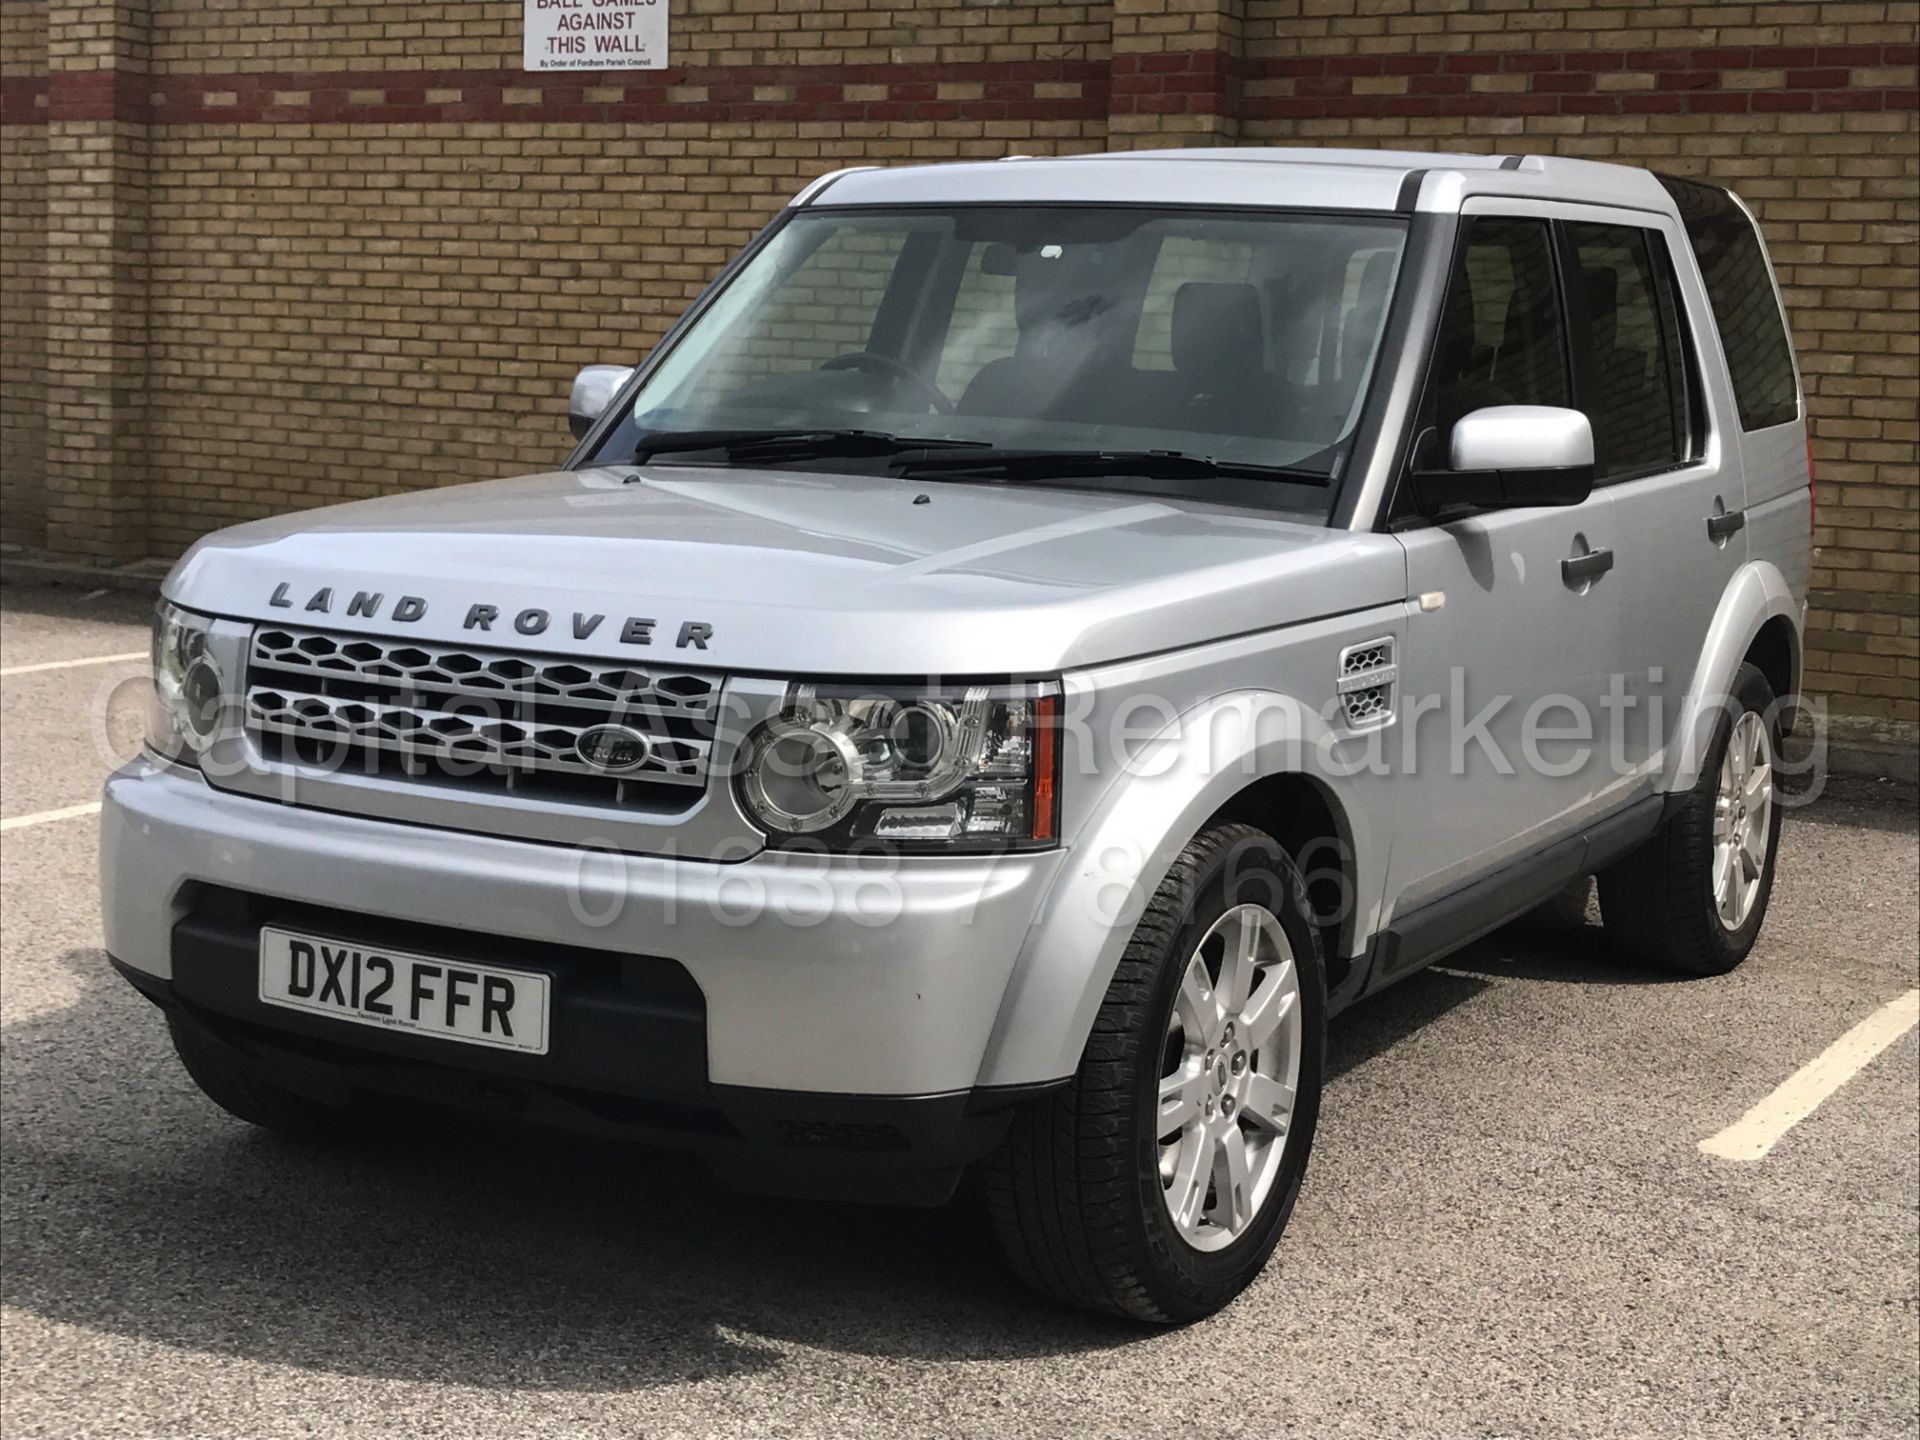 (On Sale) LAND ROVER DISCOVERY 4 (2012) '3.0 SDV6 - 8 SPEED AUTO - 7 SEATER' **HUGE SPEC** (1 OWNER) - Image 4 of 33